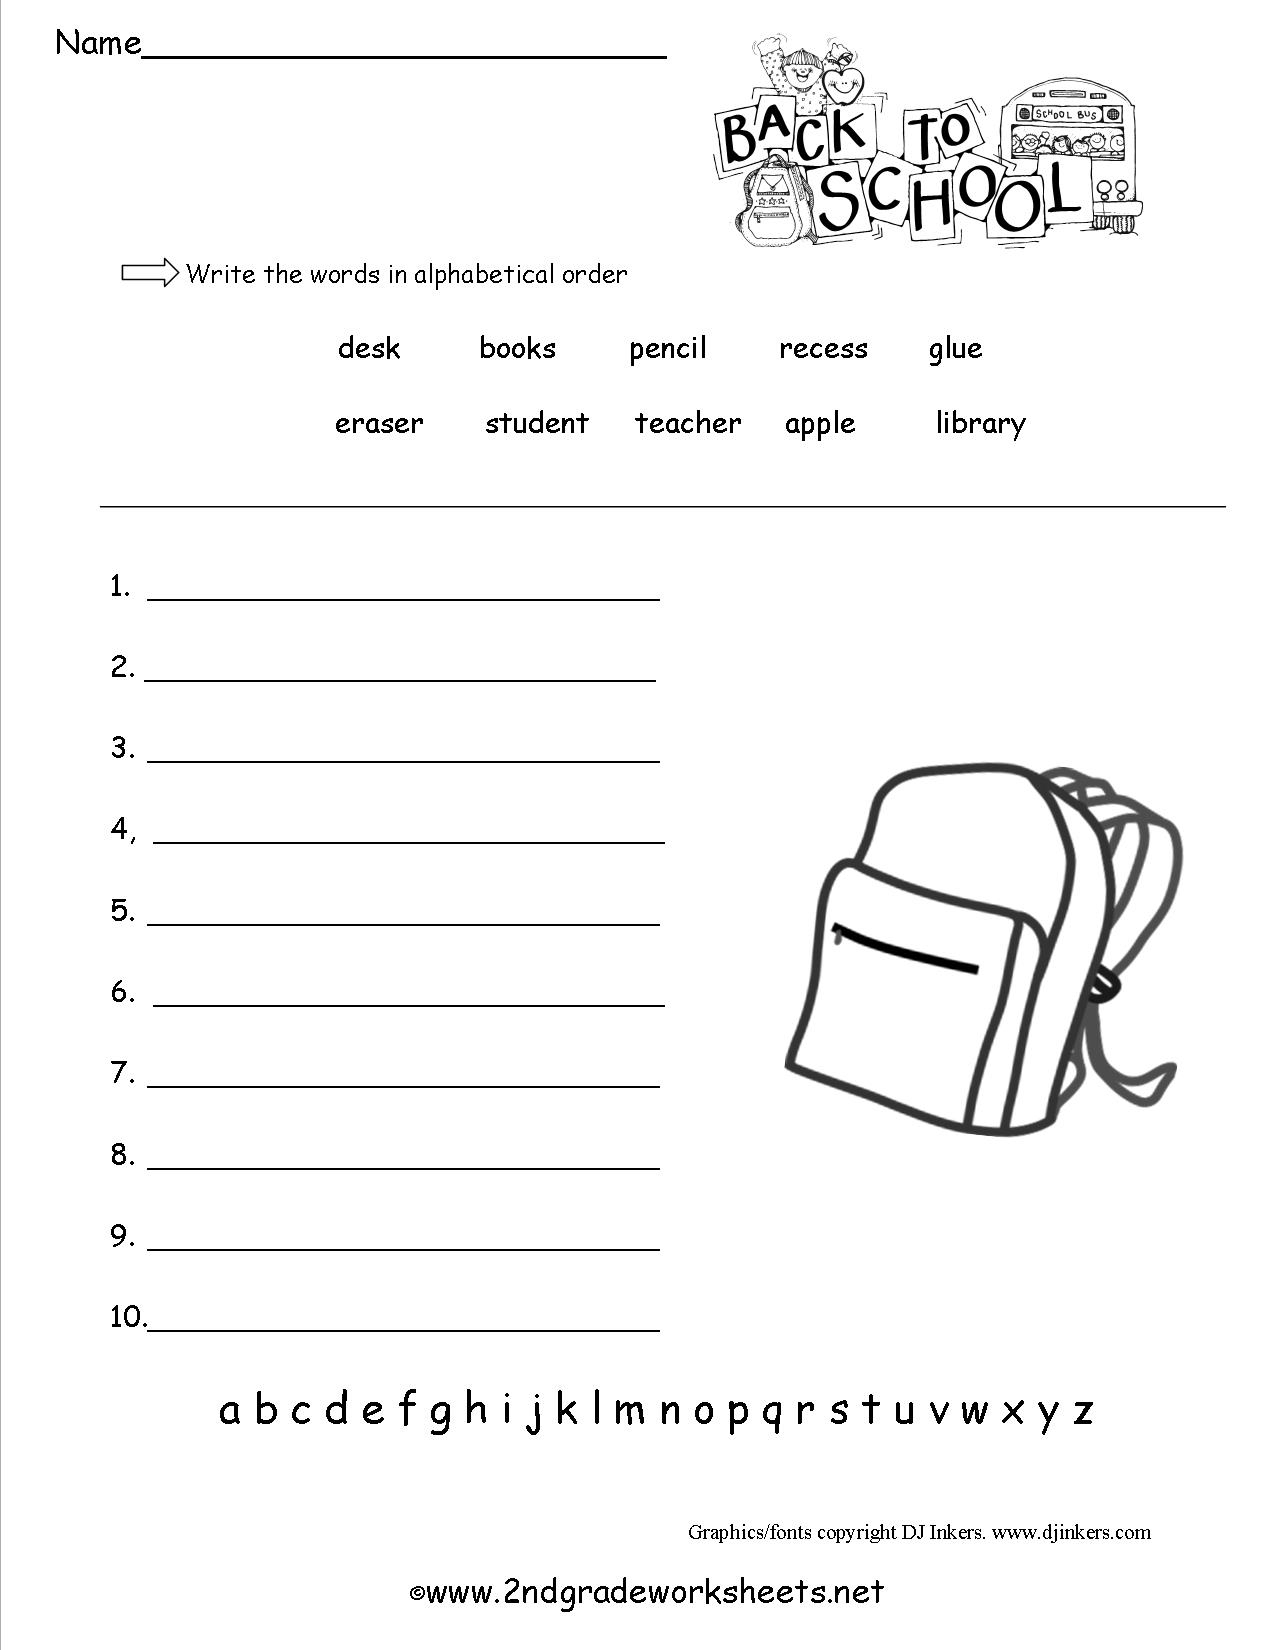 Free Back To School Worksheets And Printouts | Printable School Worksheets